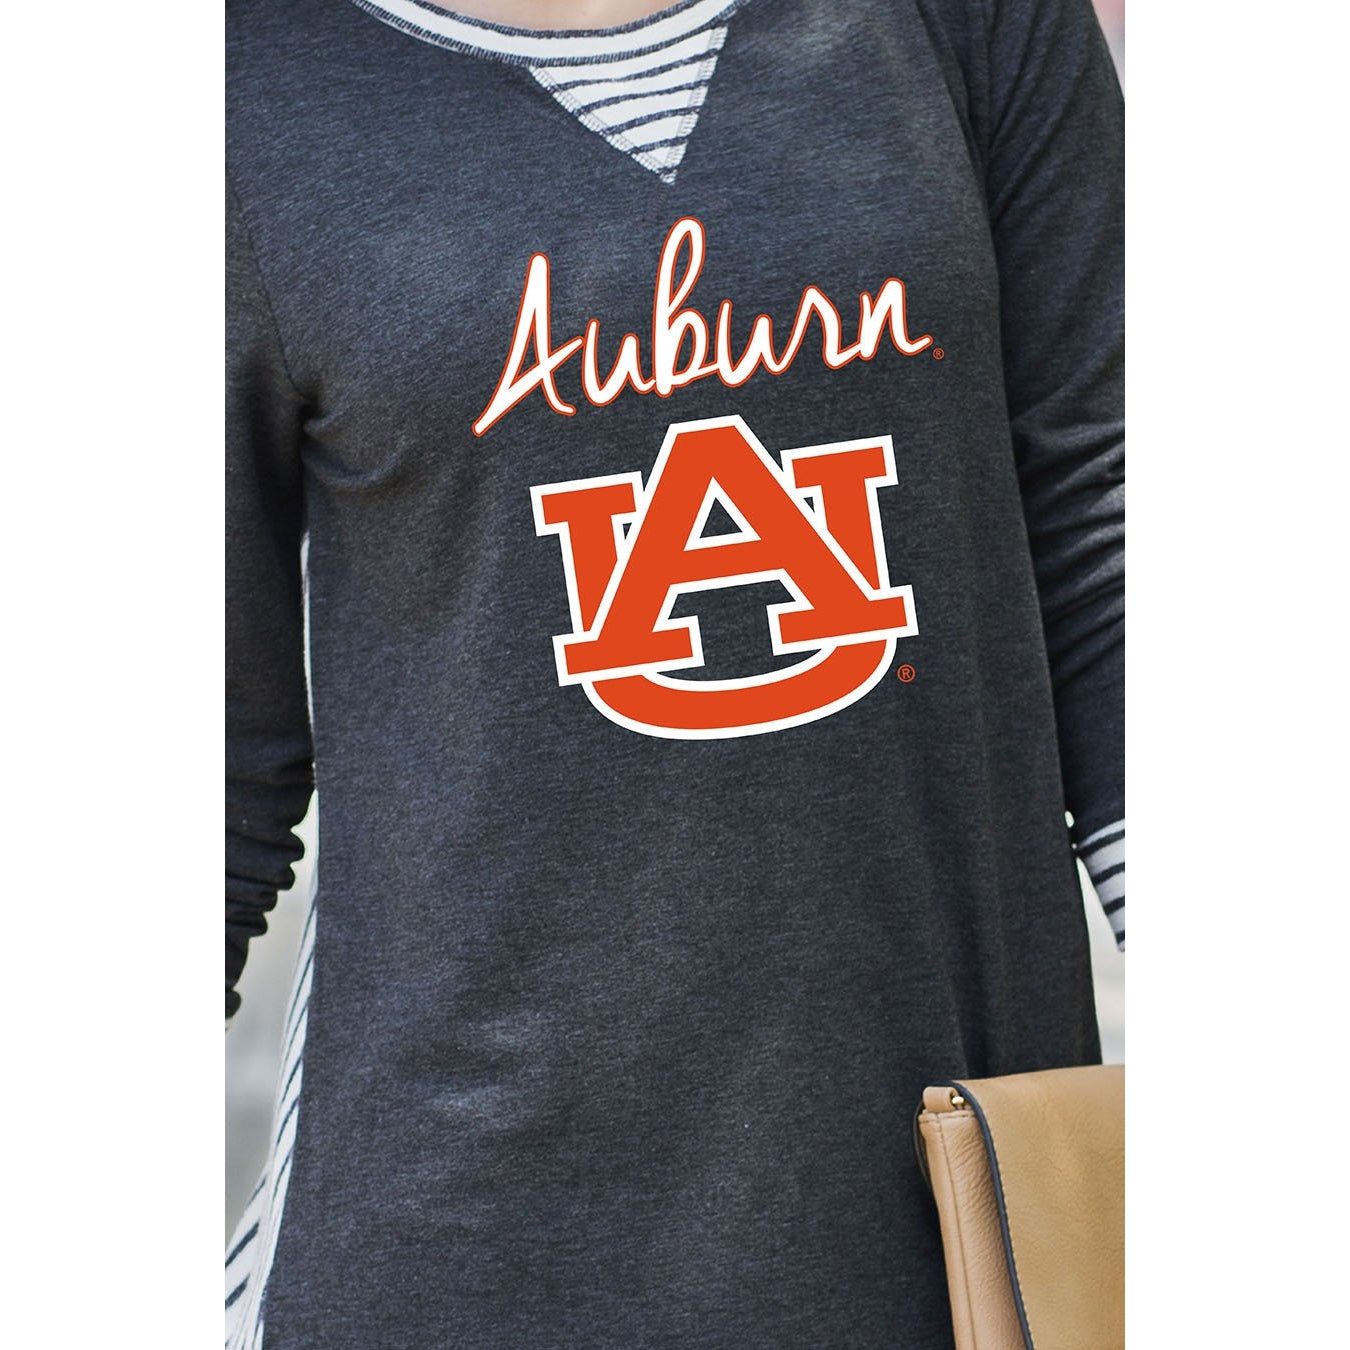 Gameday Couture You'll Be Back Striped Tunic - Auburn - Southern Ivy Boutique